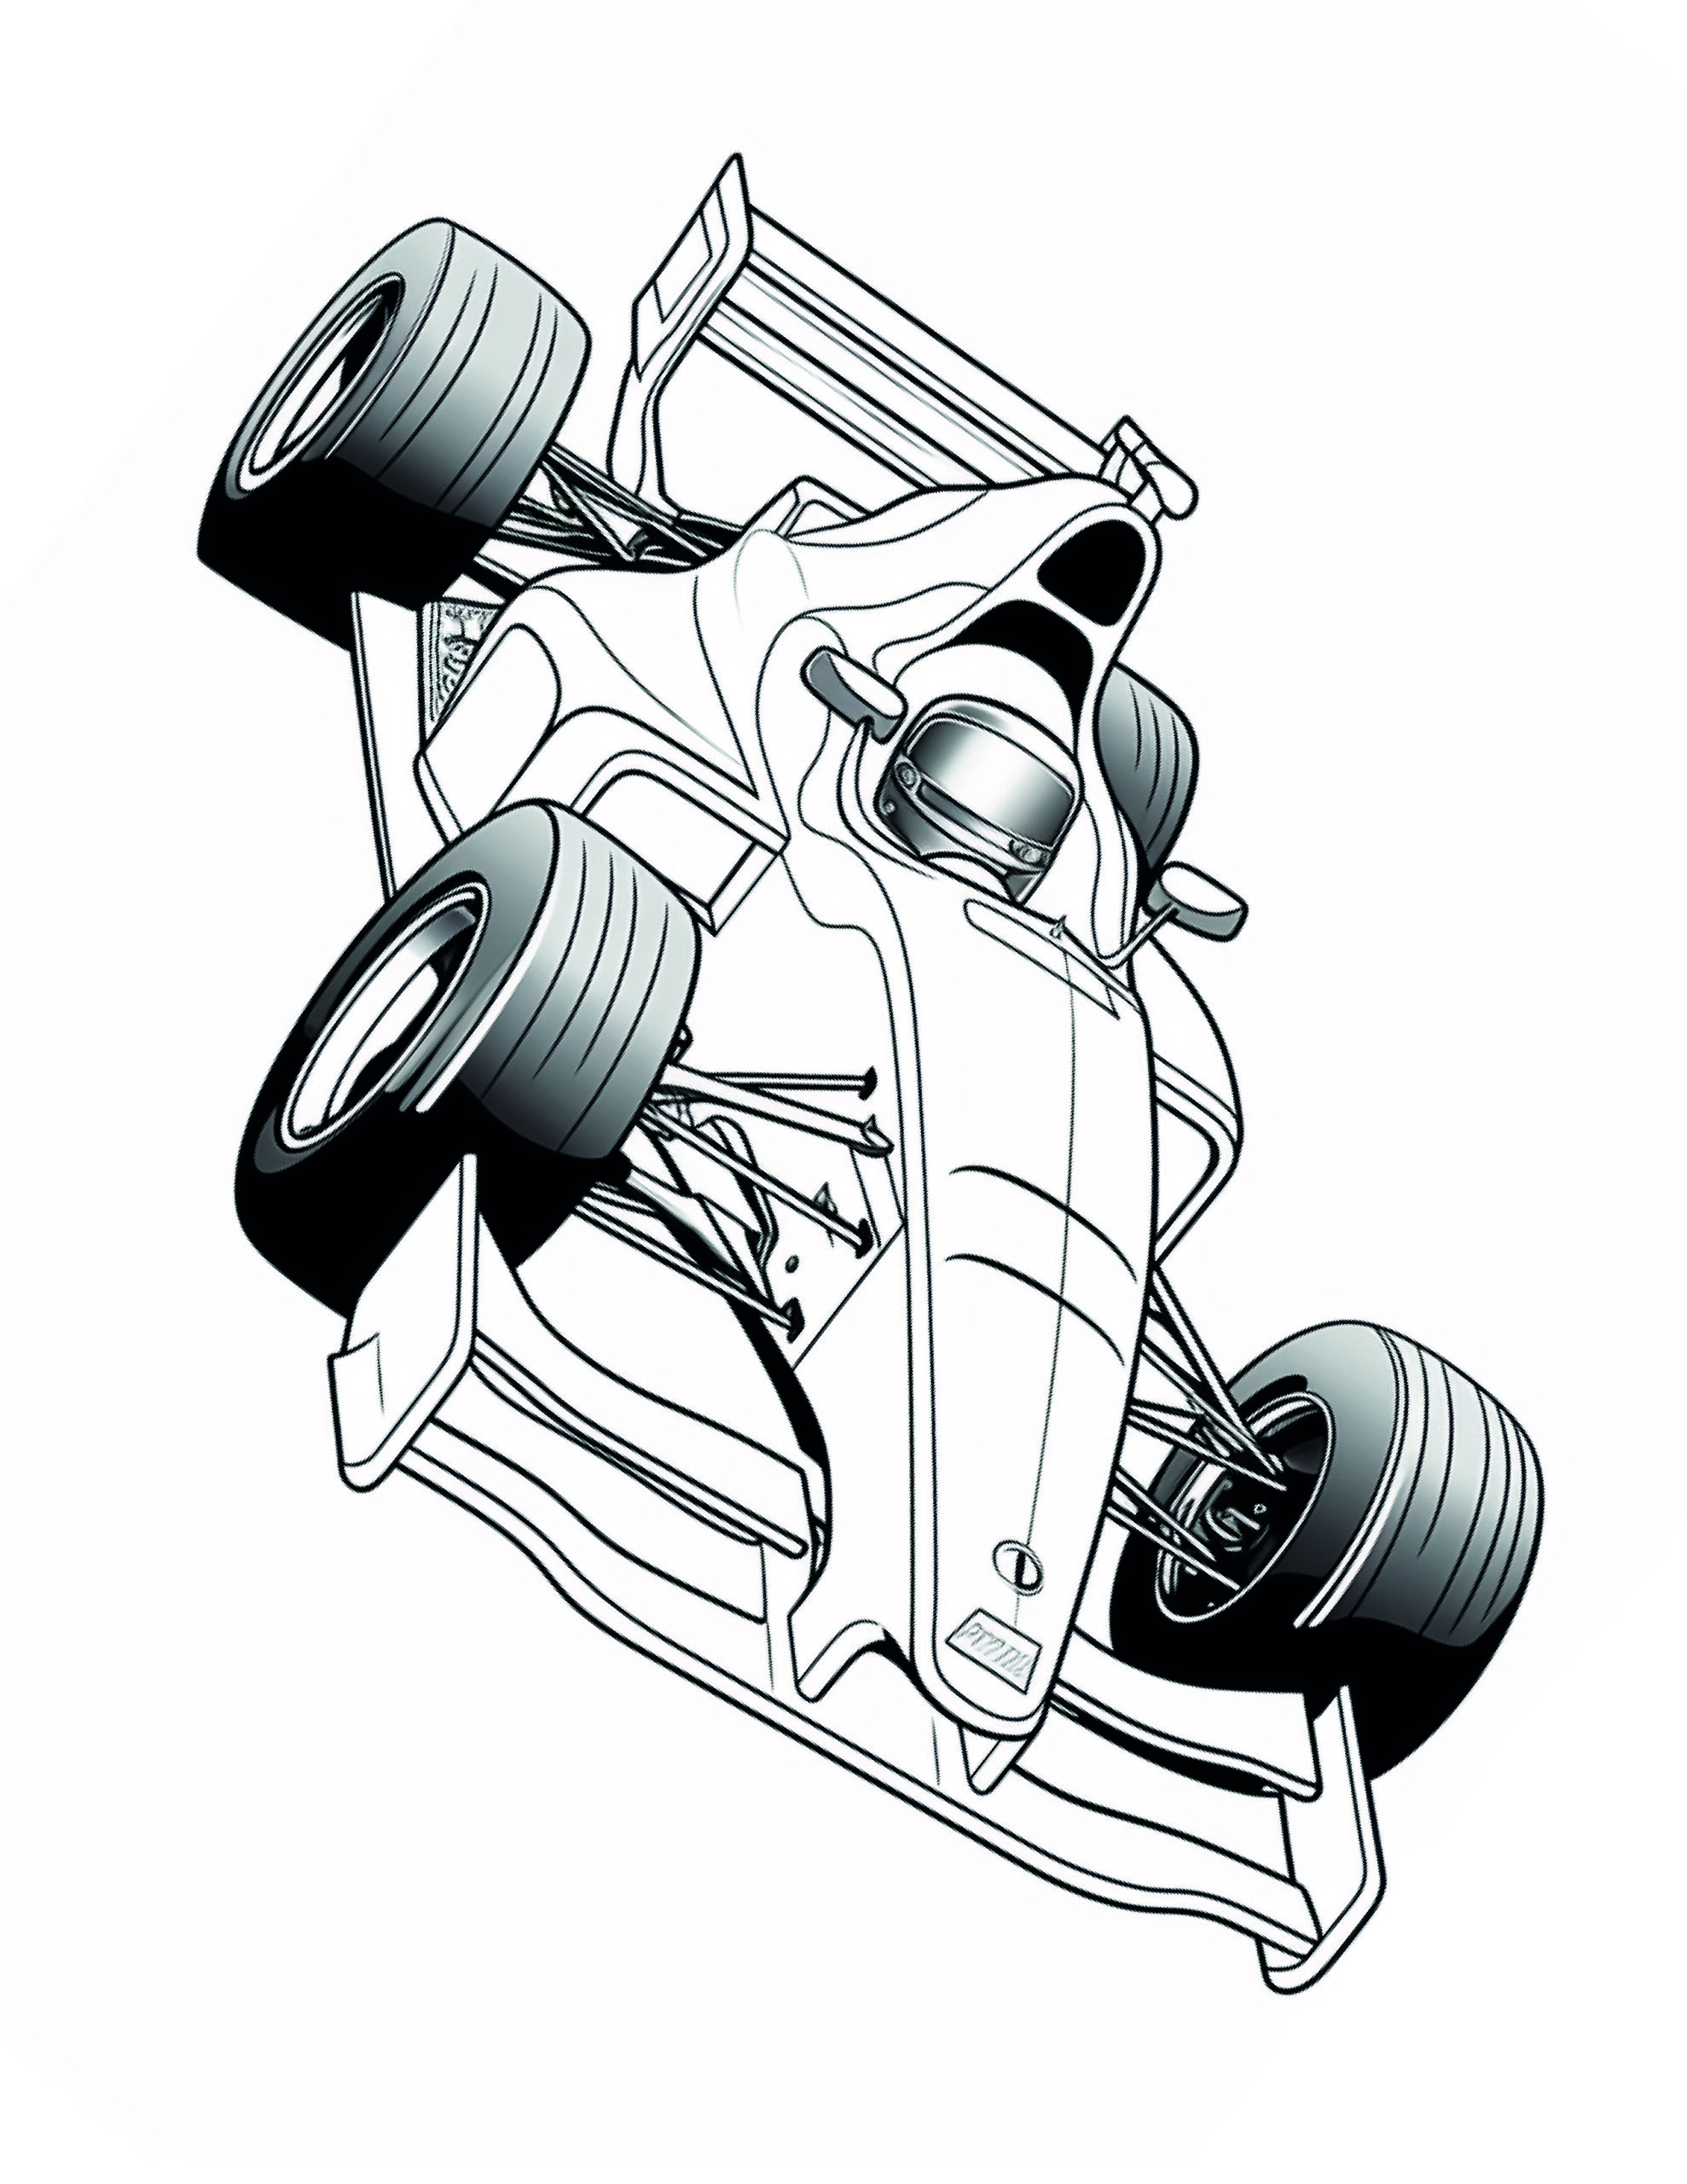 Race Car Coloring Page 2 - A line drawing of a formula one car with black tires.